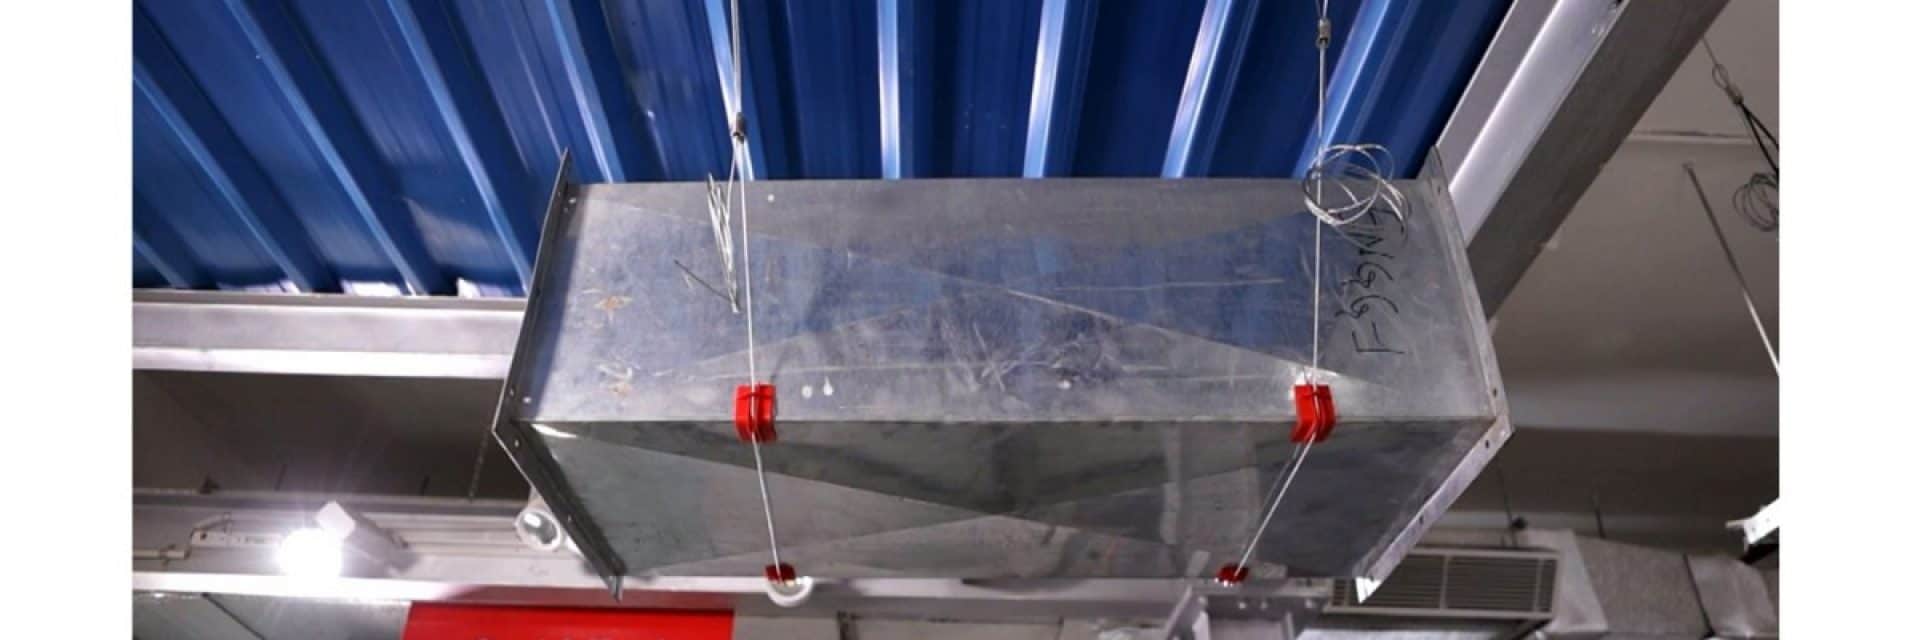 Hilti Wire Hanging System